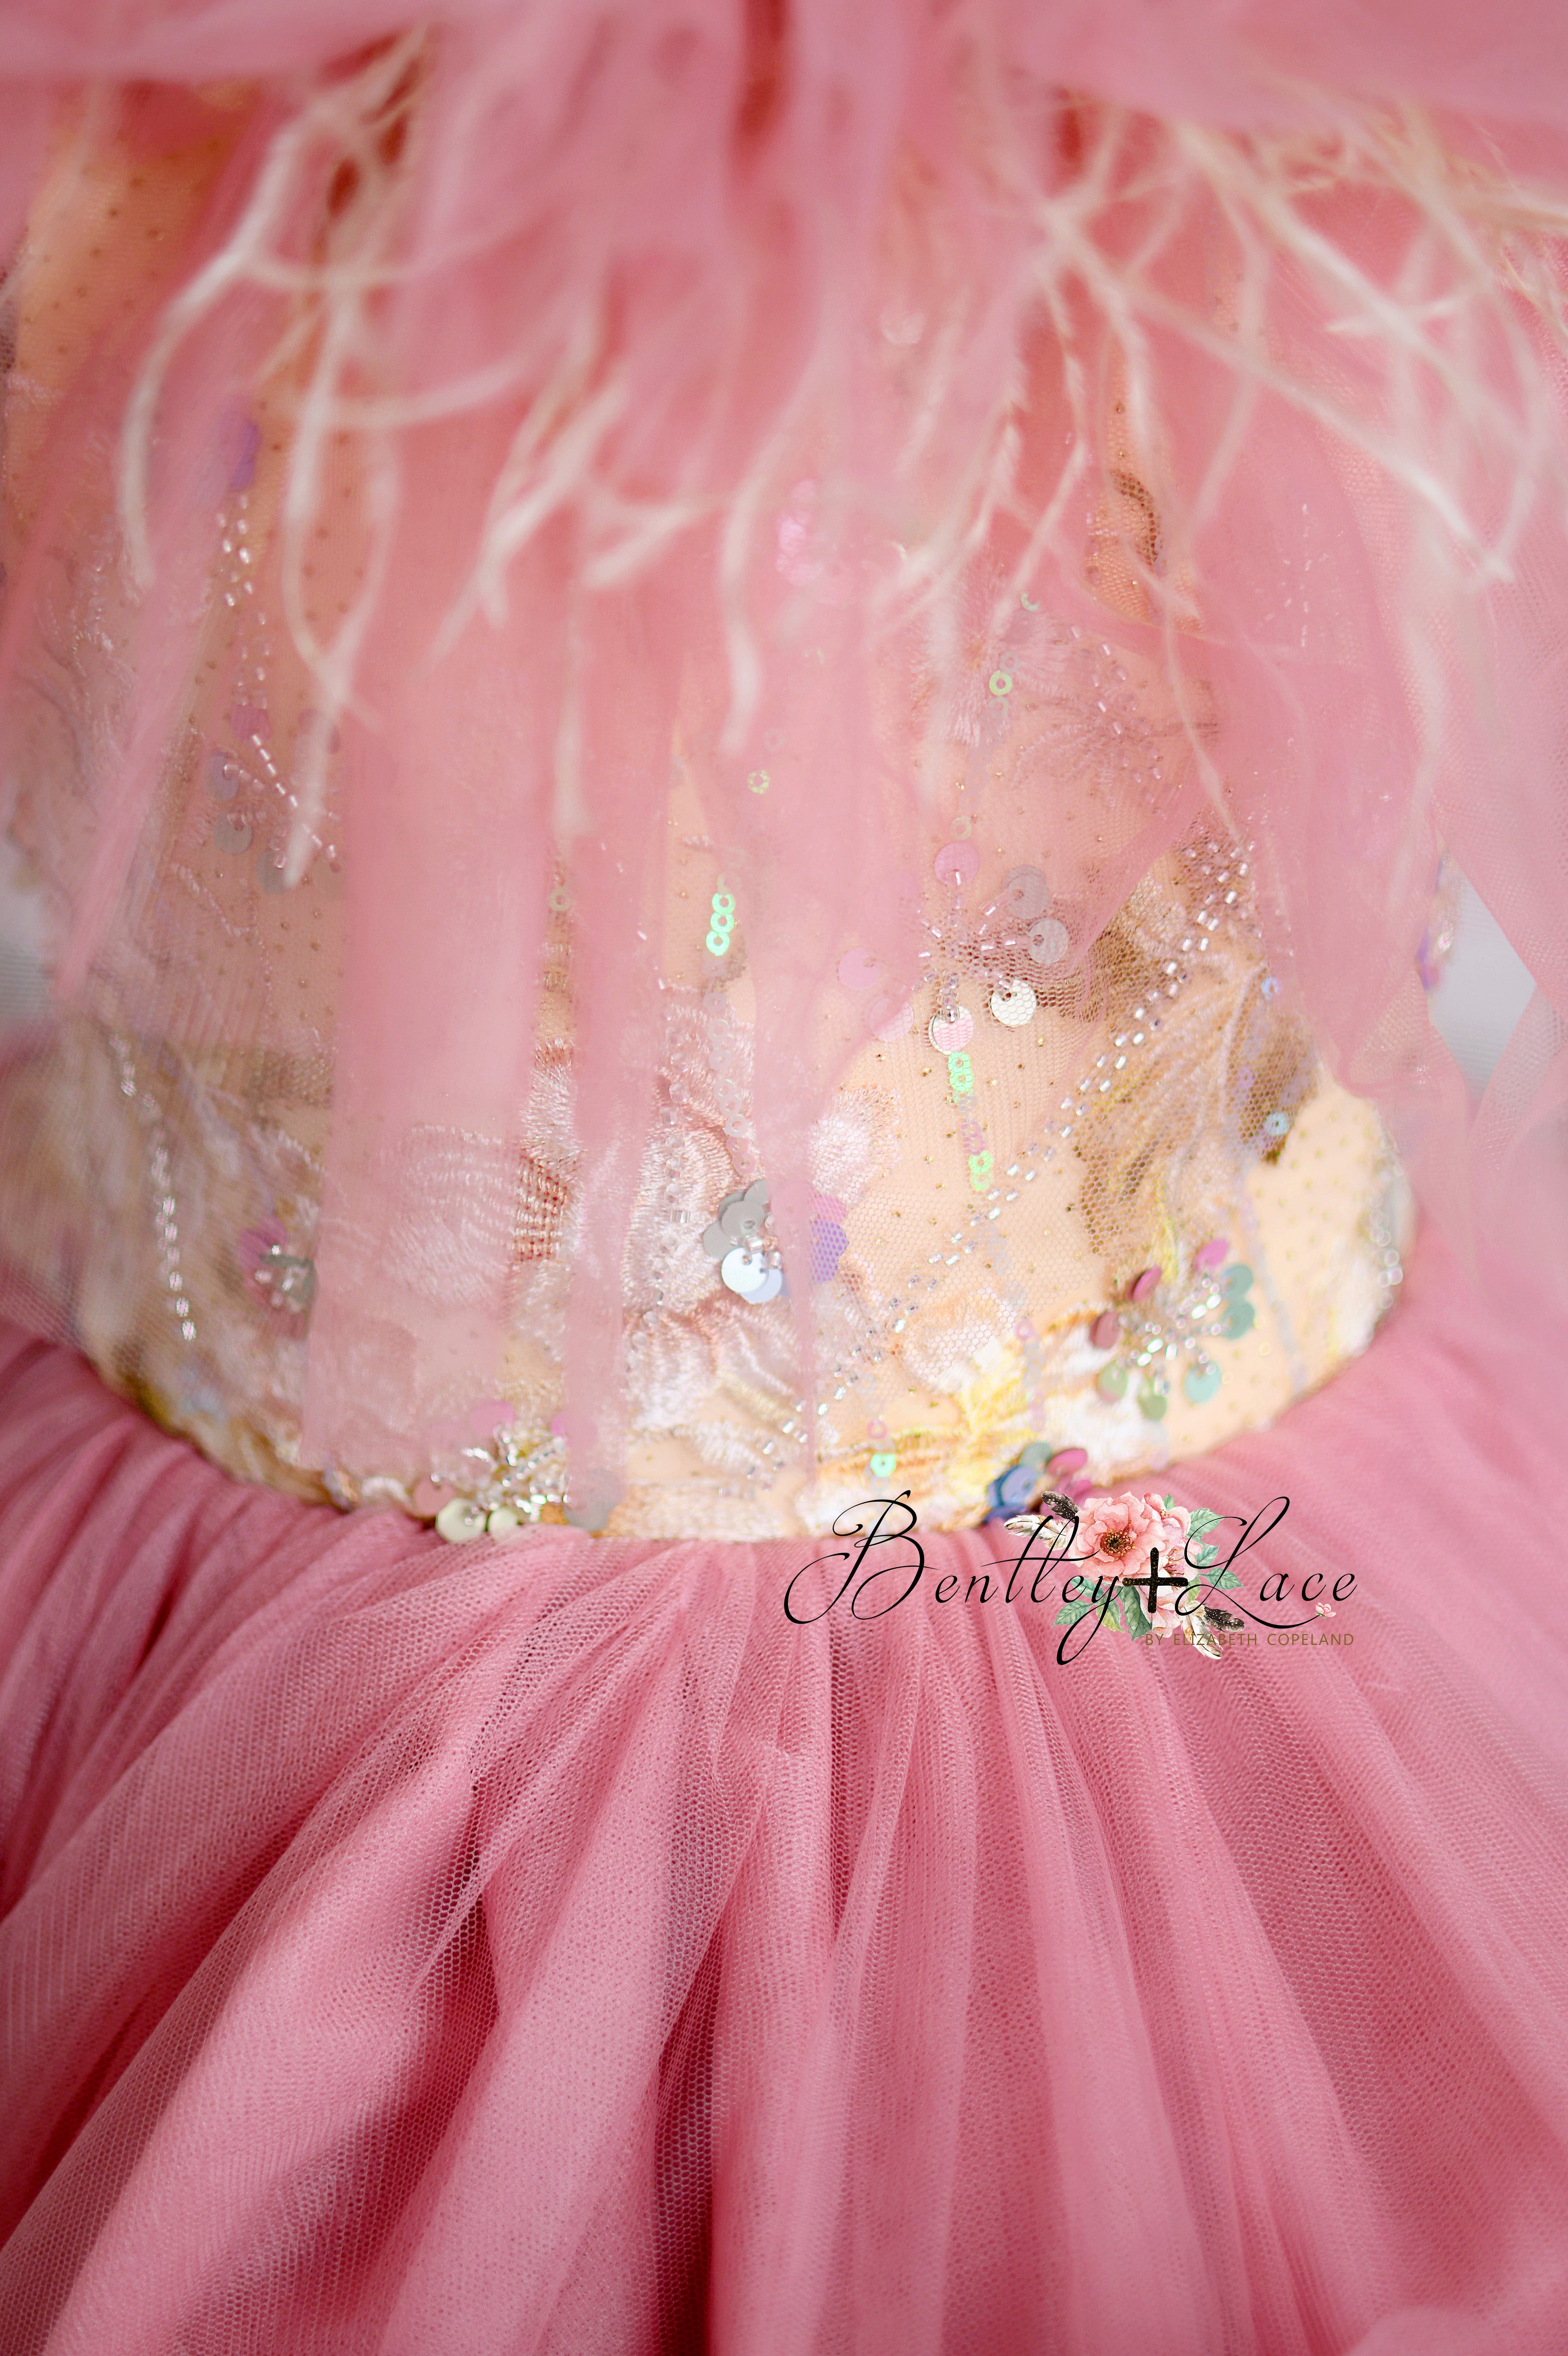 children's gowns for styled photography sessions